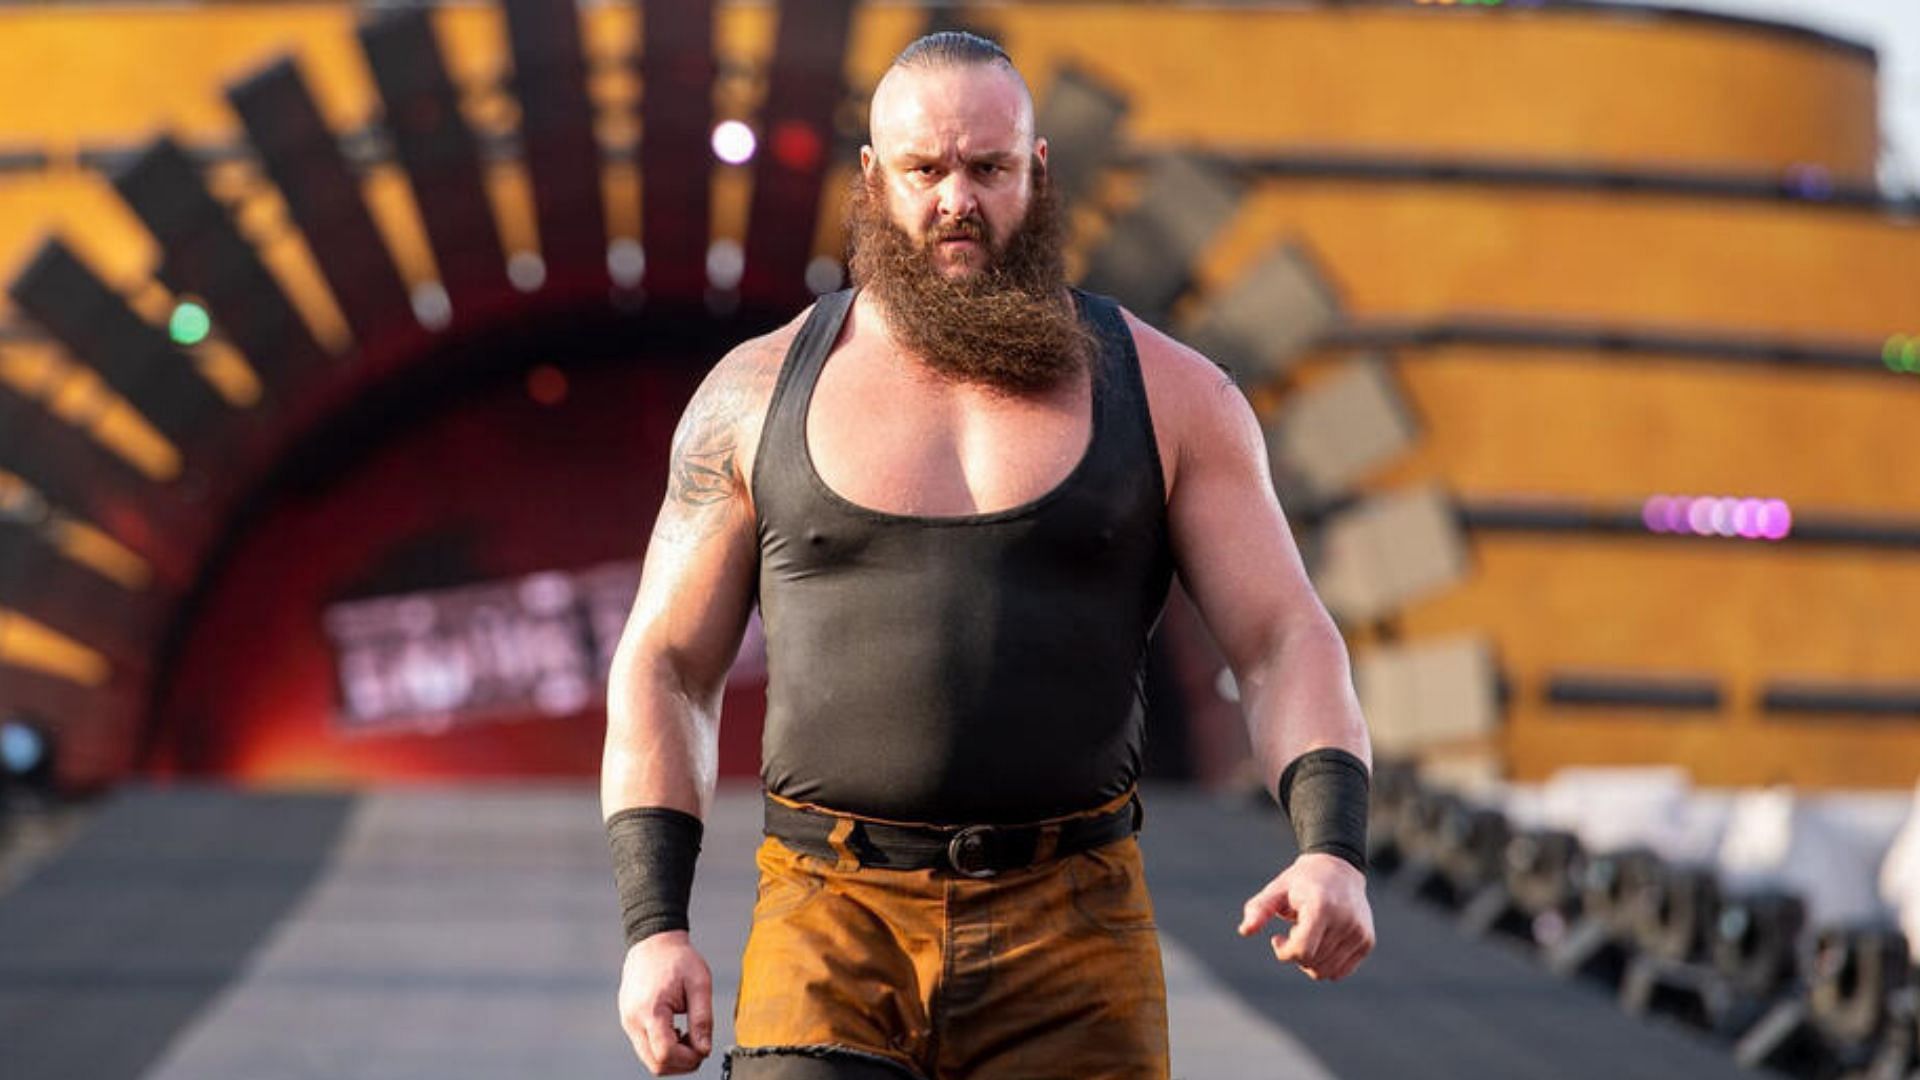 Strowman has not competed since last year.